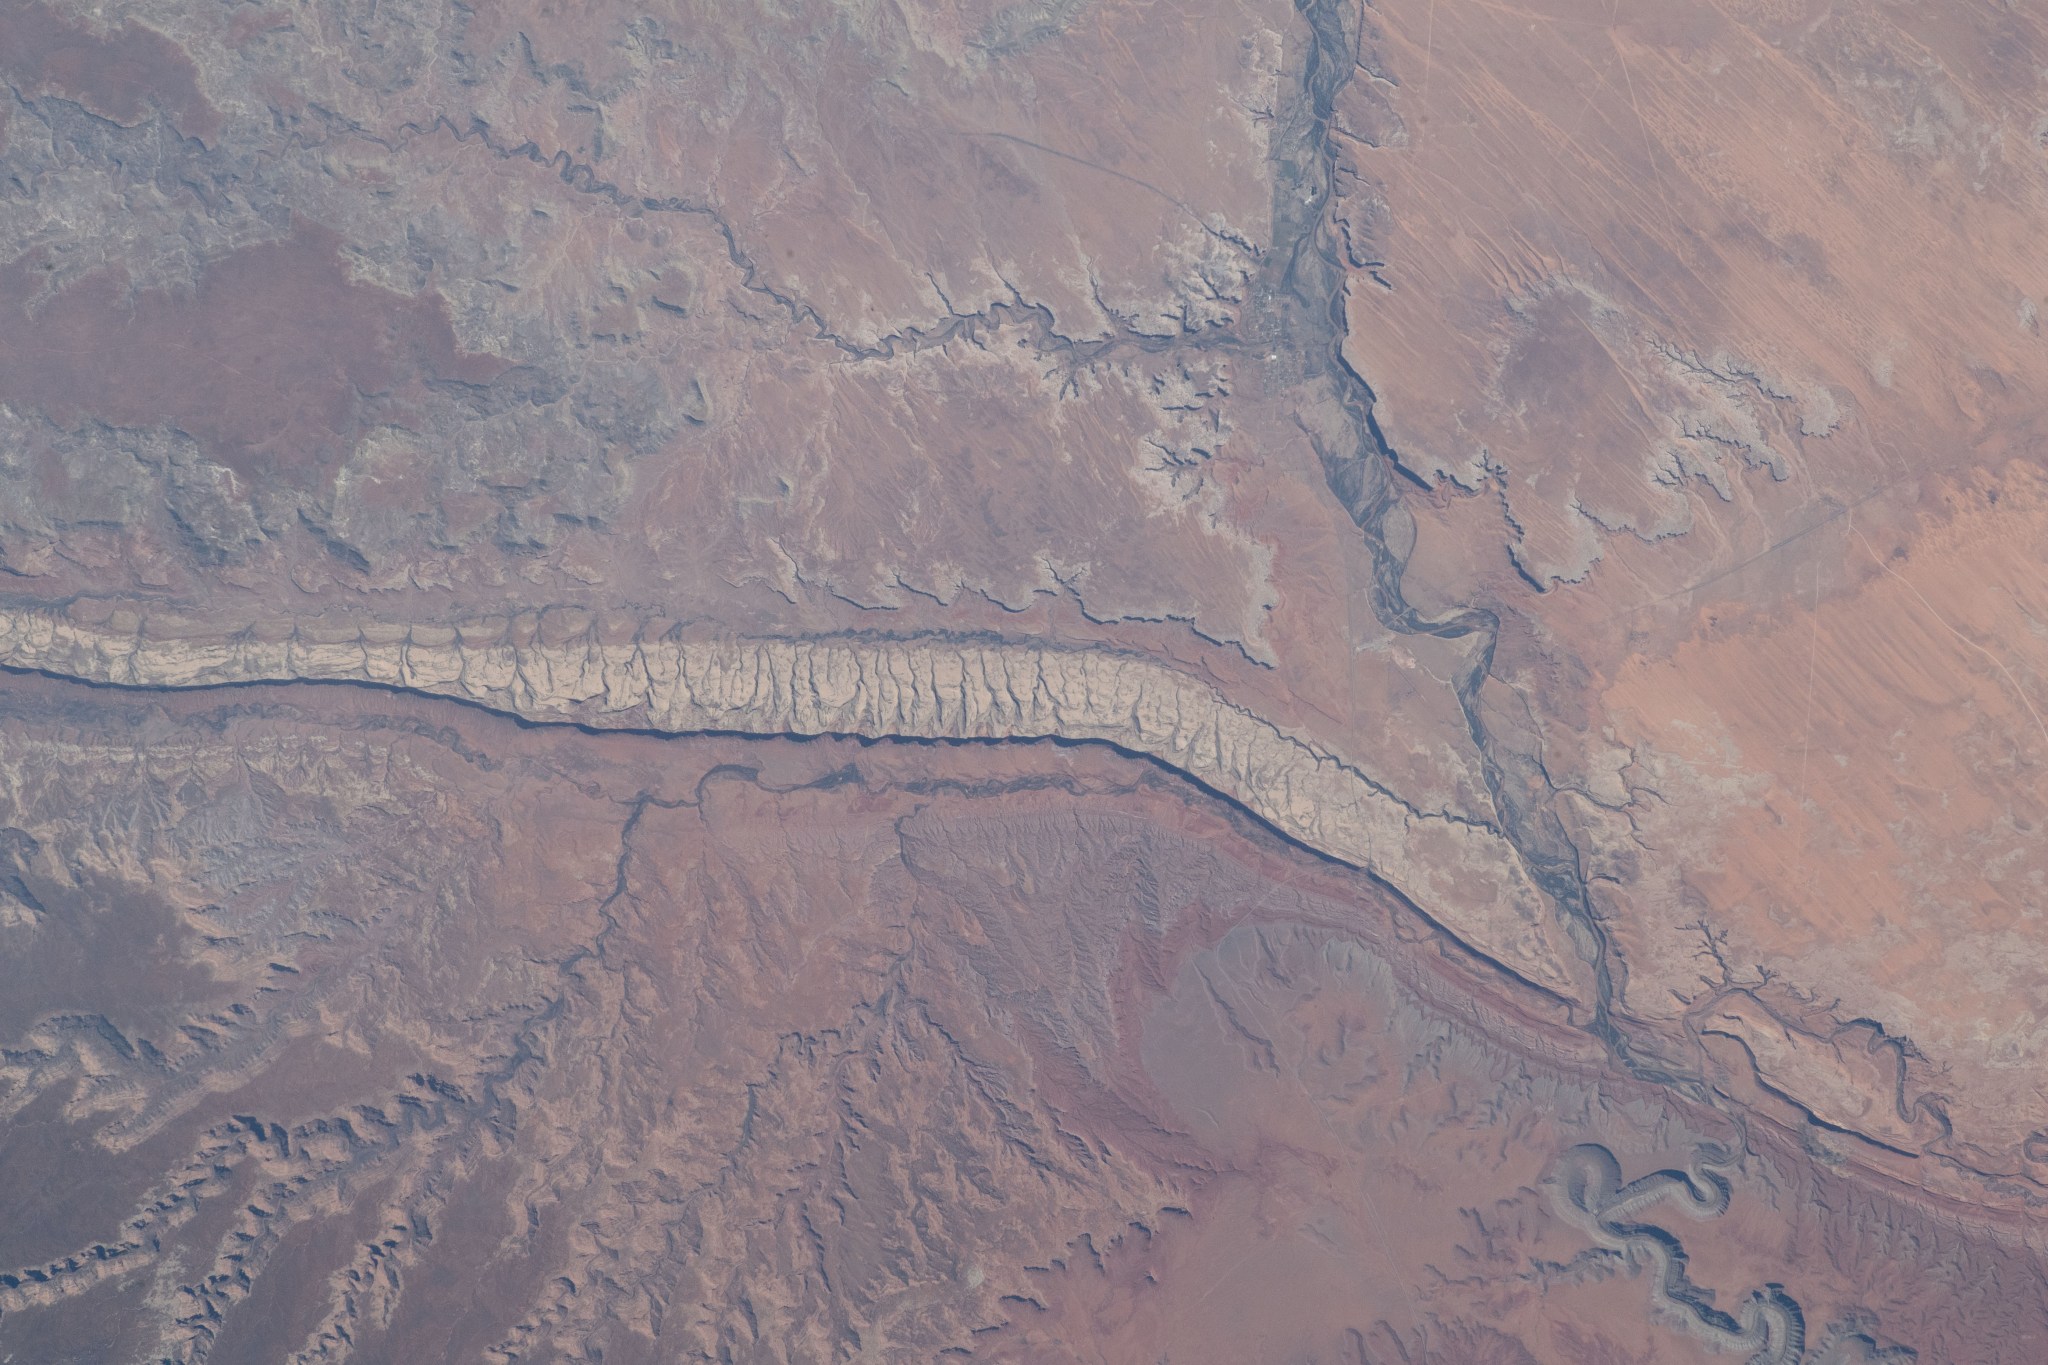 This image shows a portion of Canyonlands National Park in Utah and the San Juan River as the International Space Station orbits 263 miles above.